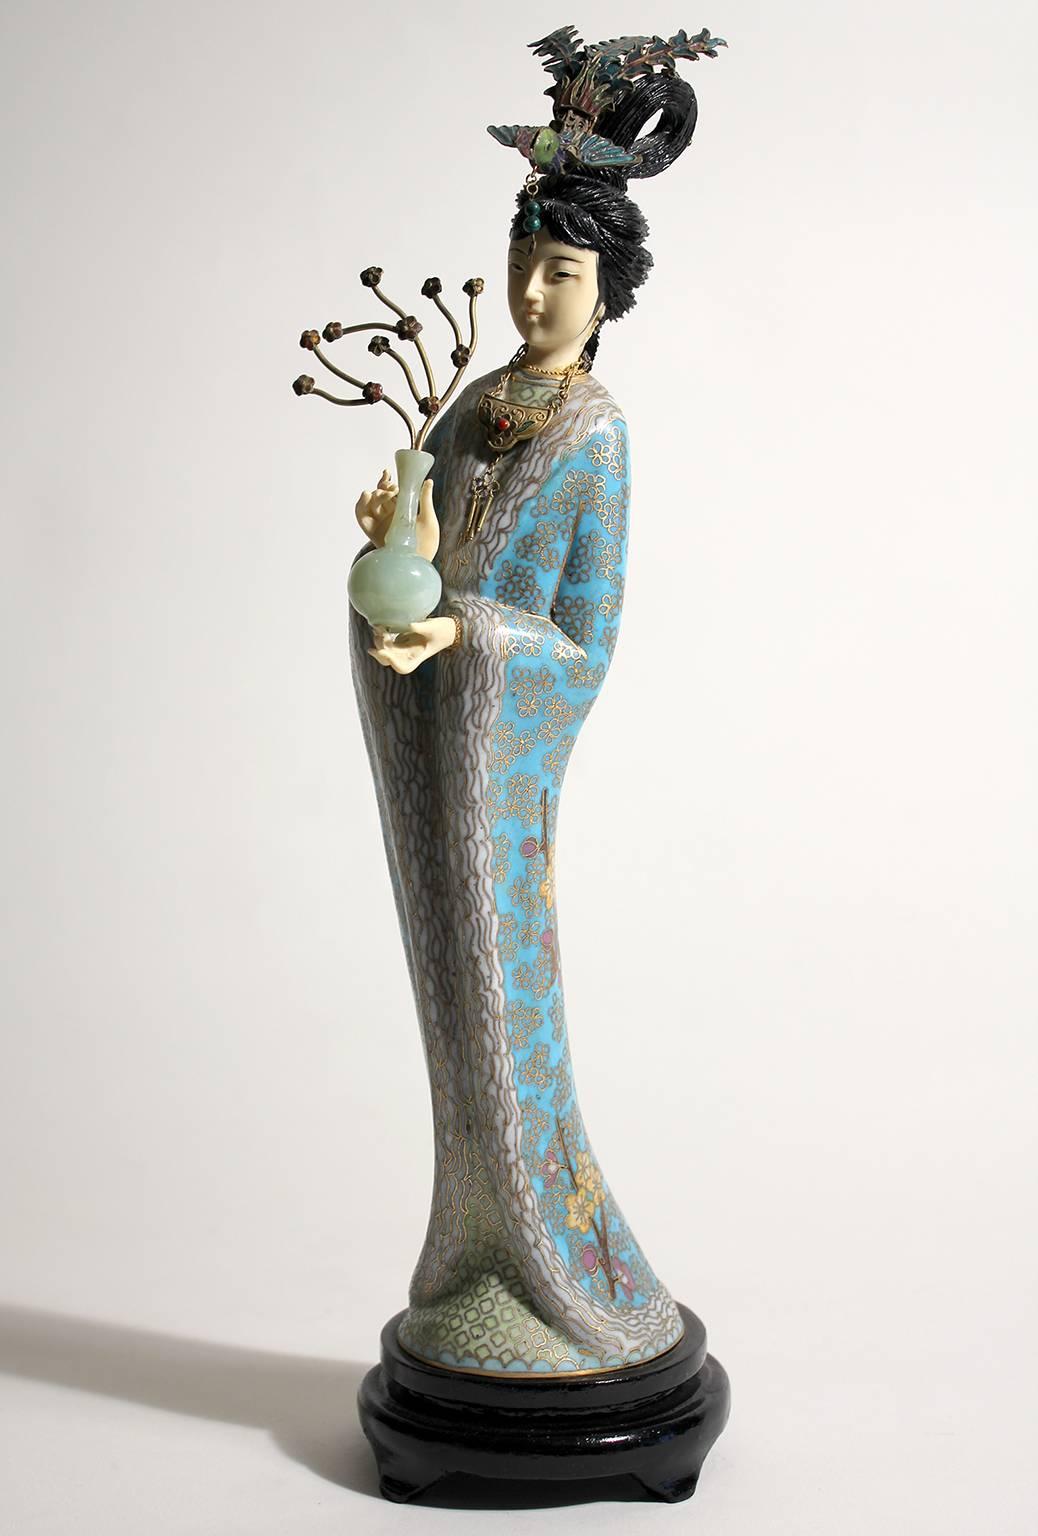 Stunning Chinese Guanyin cloisonné enameled figurine/sculpture. Comes with the original wood stand. Hands and head are carved. Stunning color and details are second to none. Measures: 14